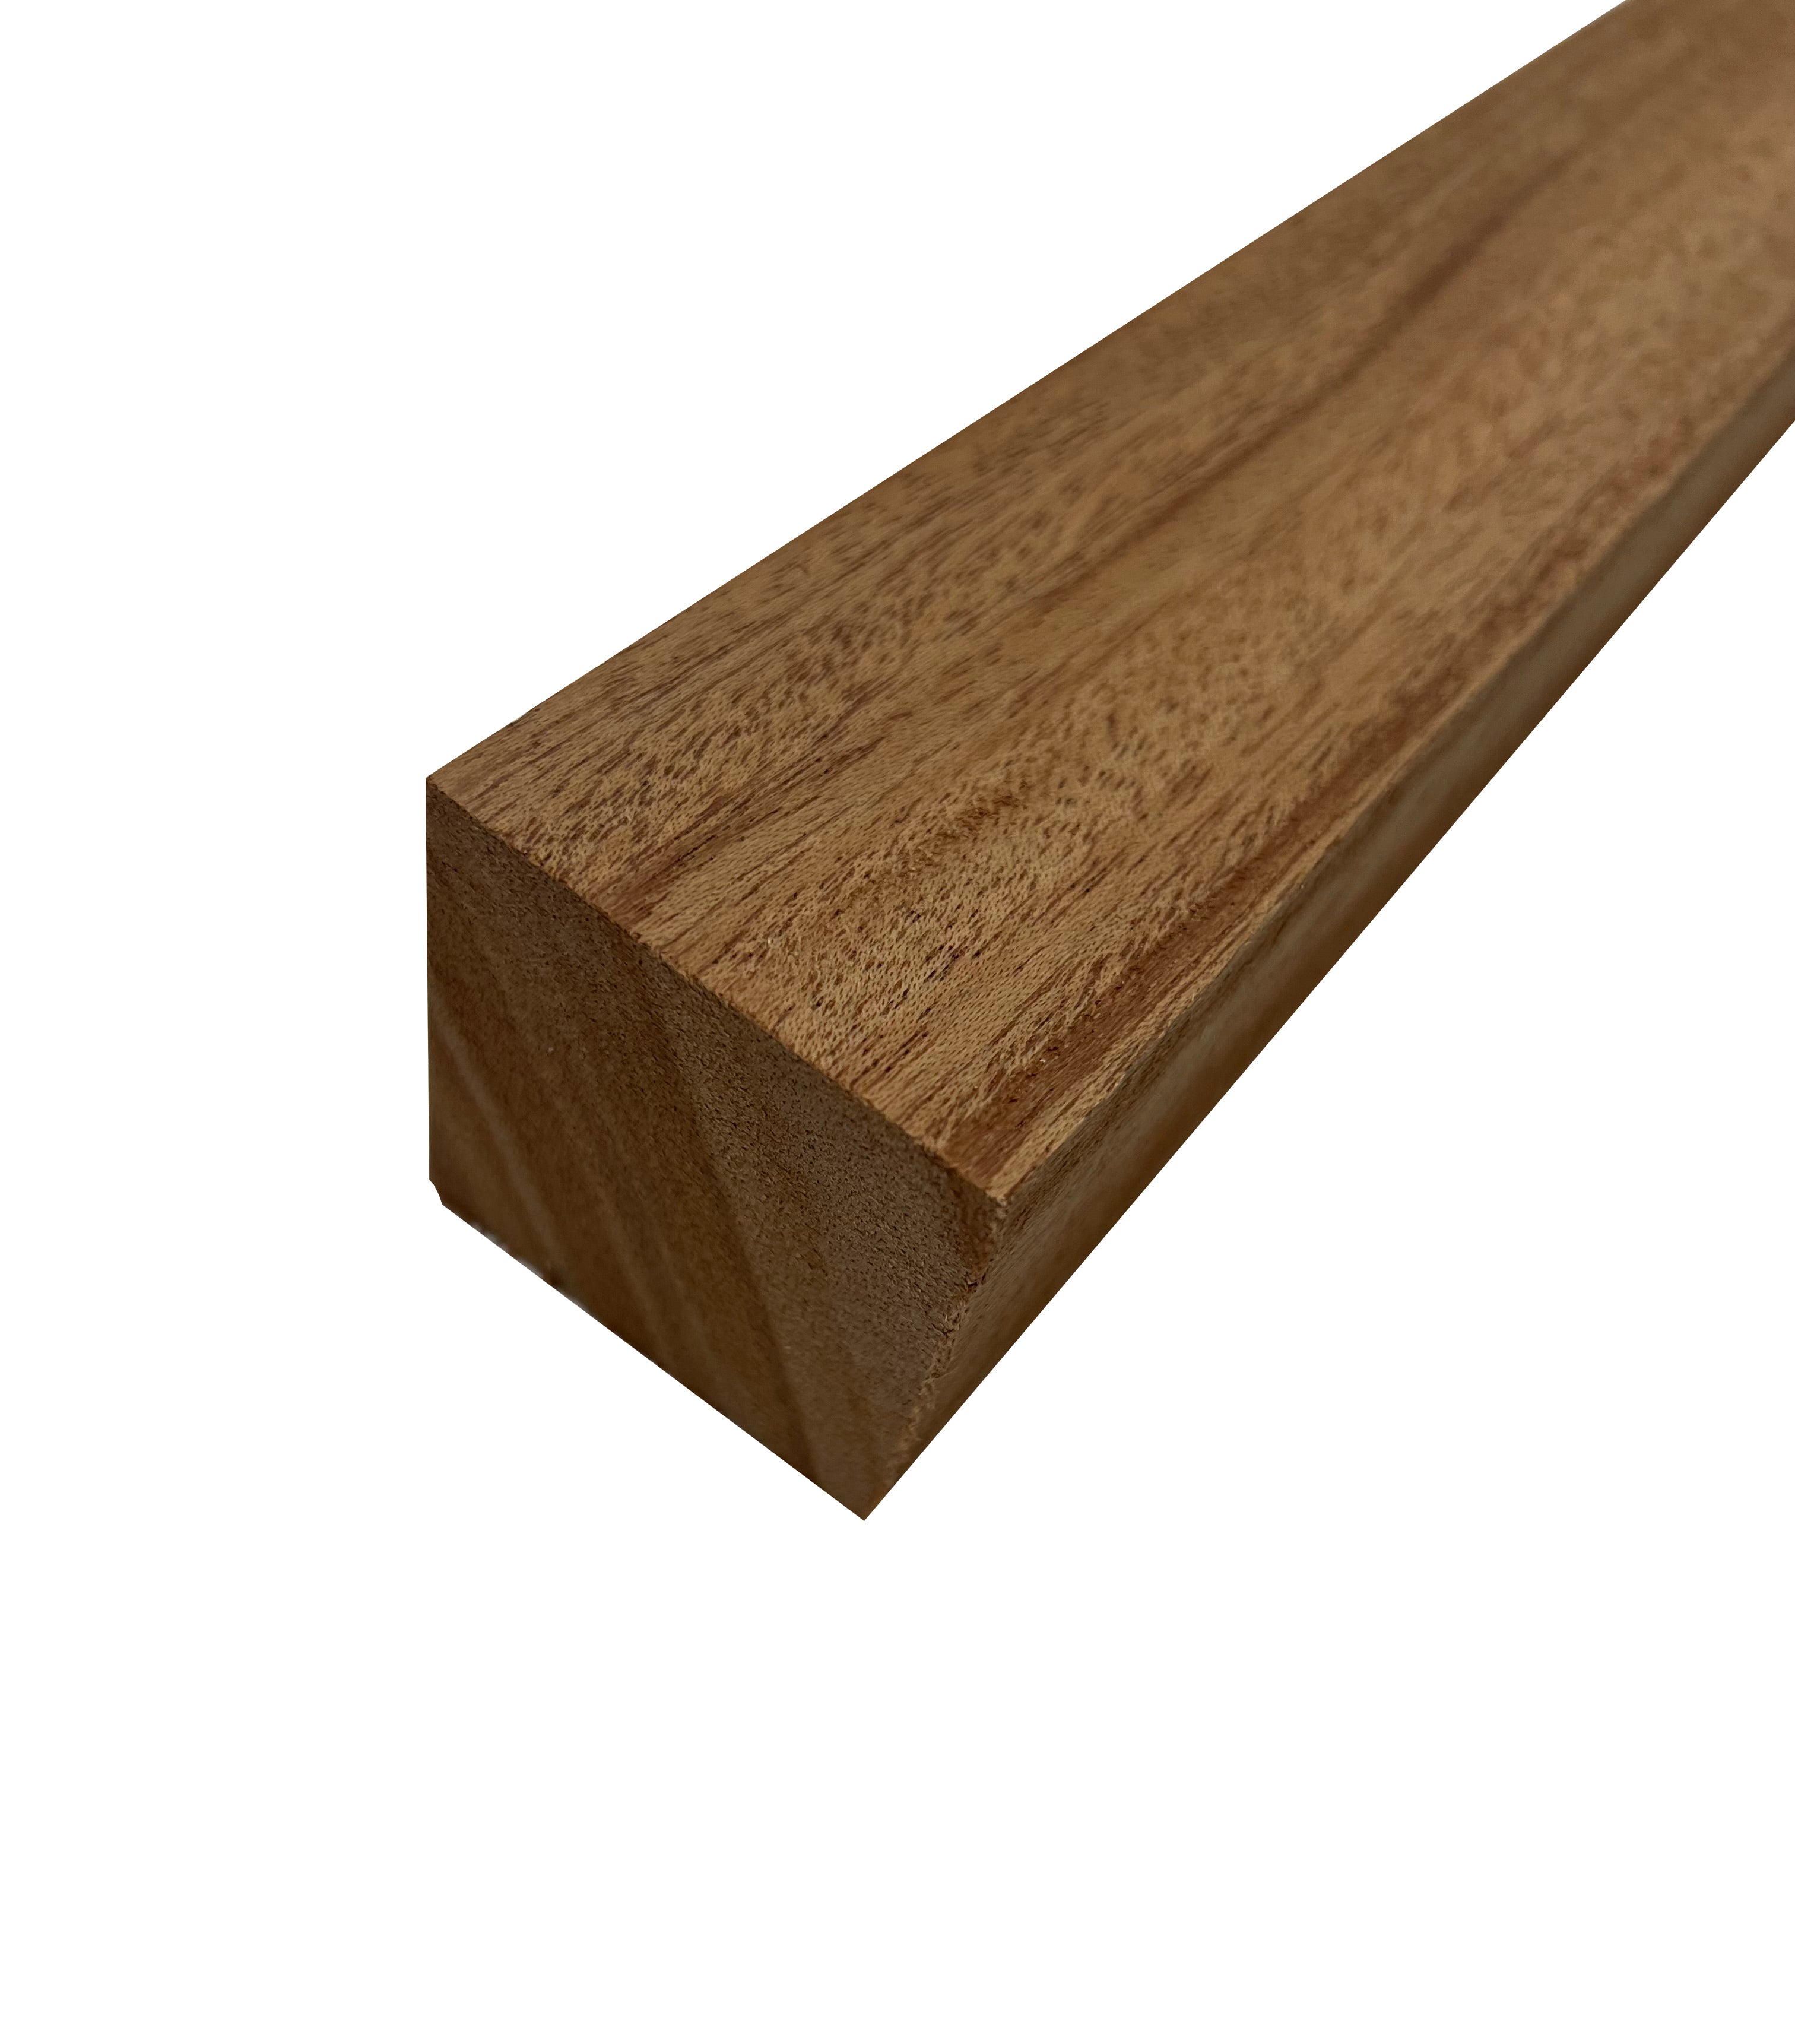 Pack Of 5 , African Mahogany Turning Wood Blanks - Exotic Wood Zone - Buy online Across USA 